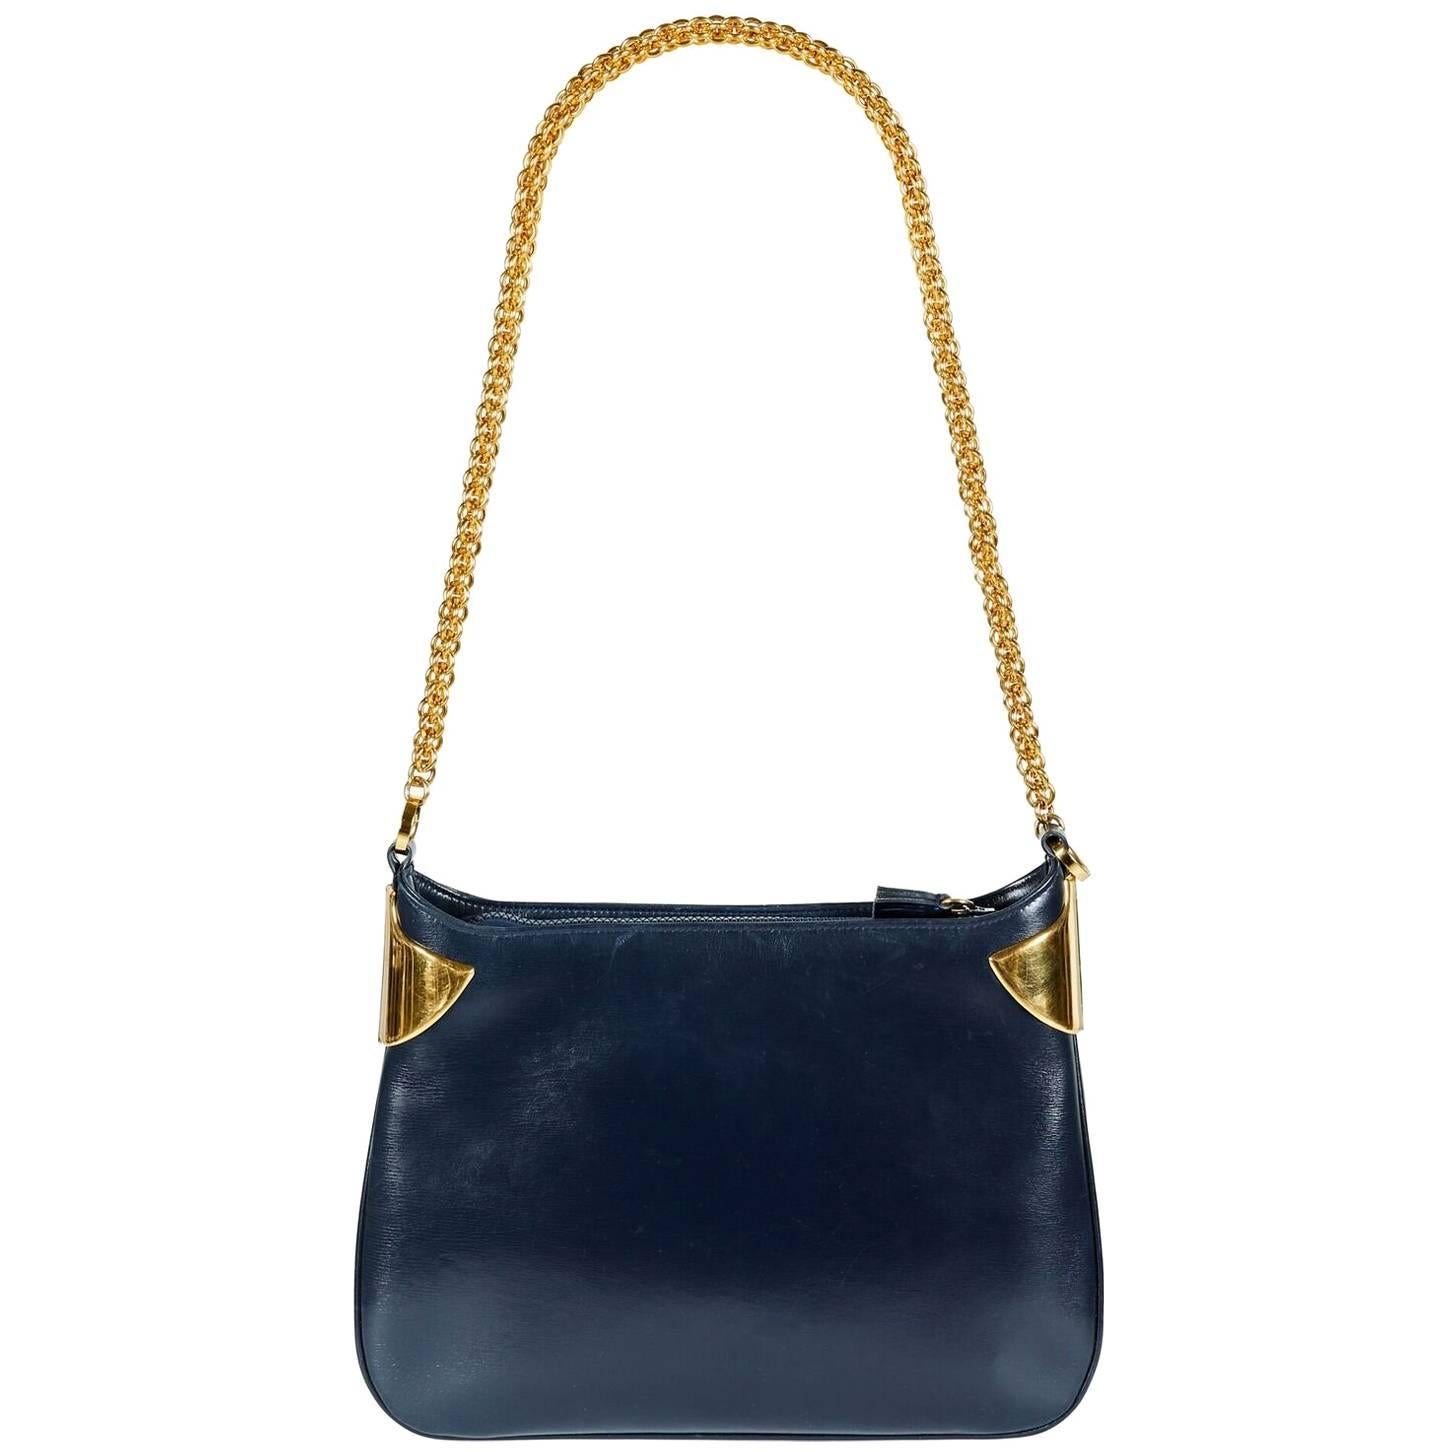 1980s Gucci Navy Blue Leather Gold Chain Shoulder Bag